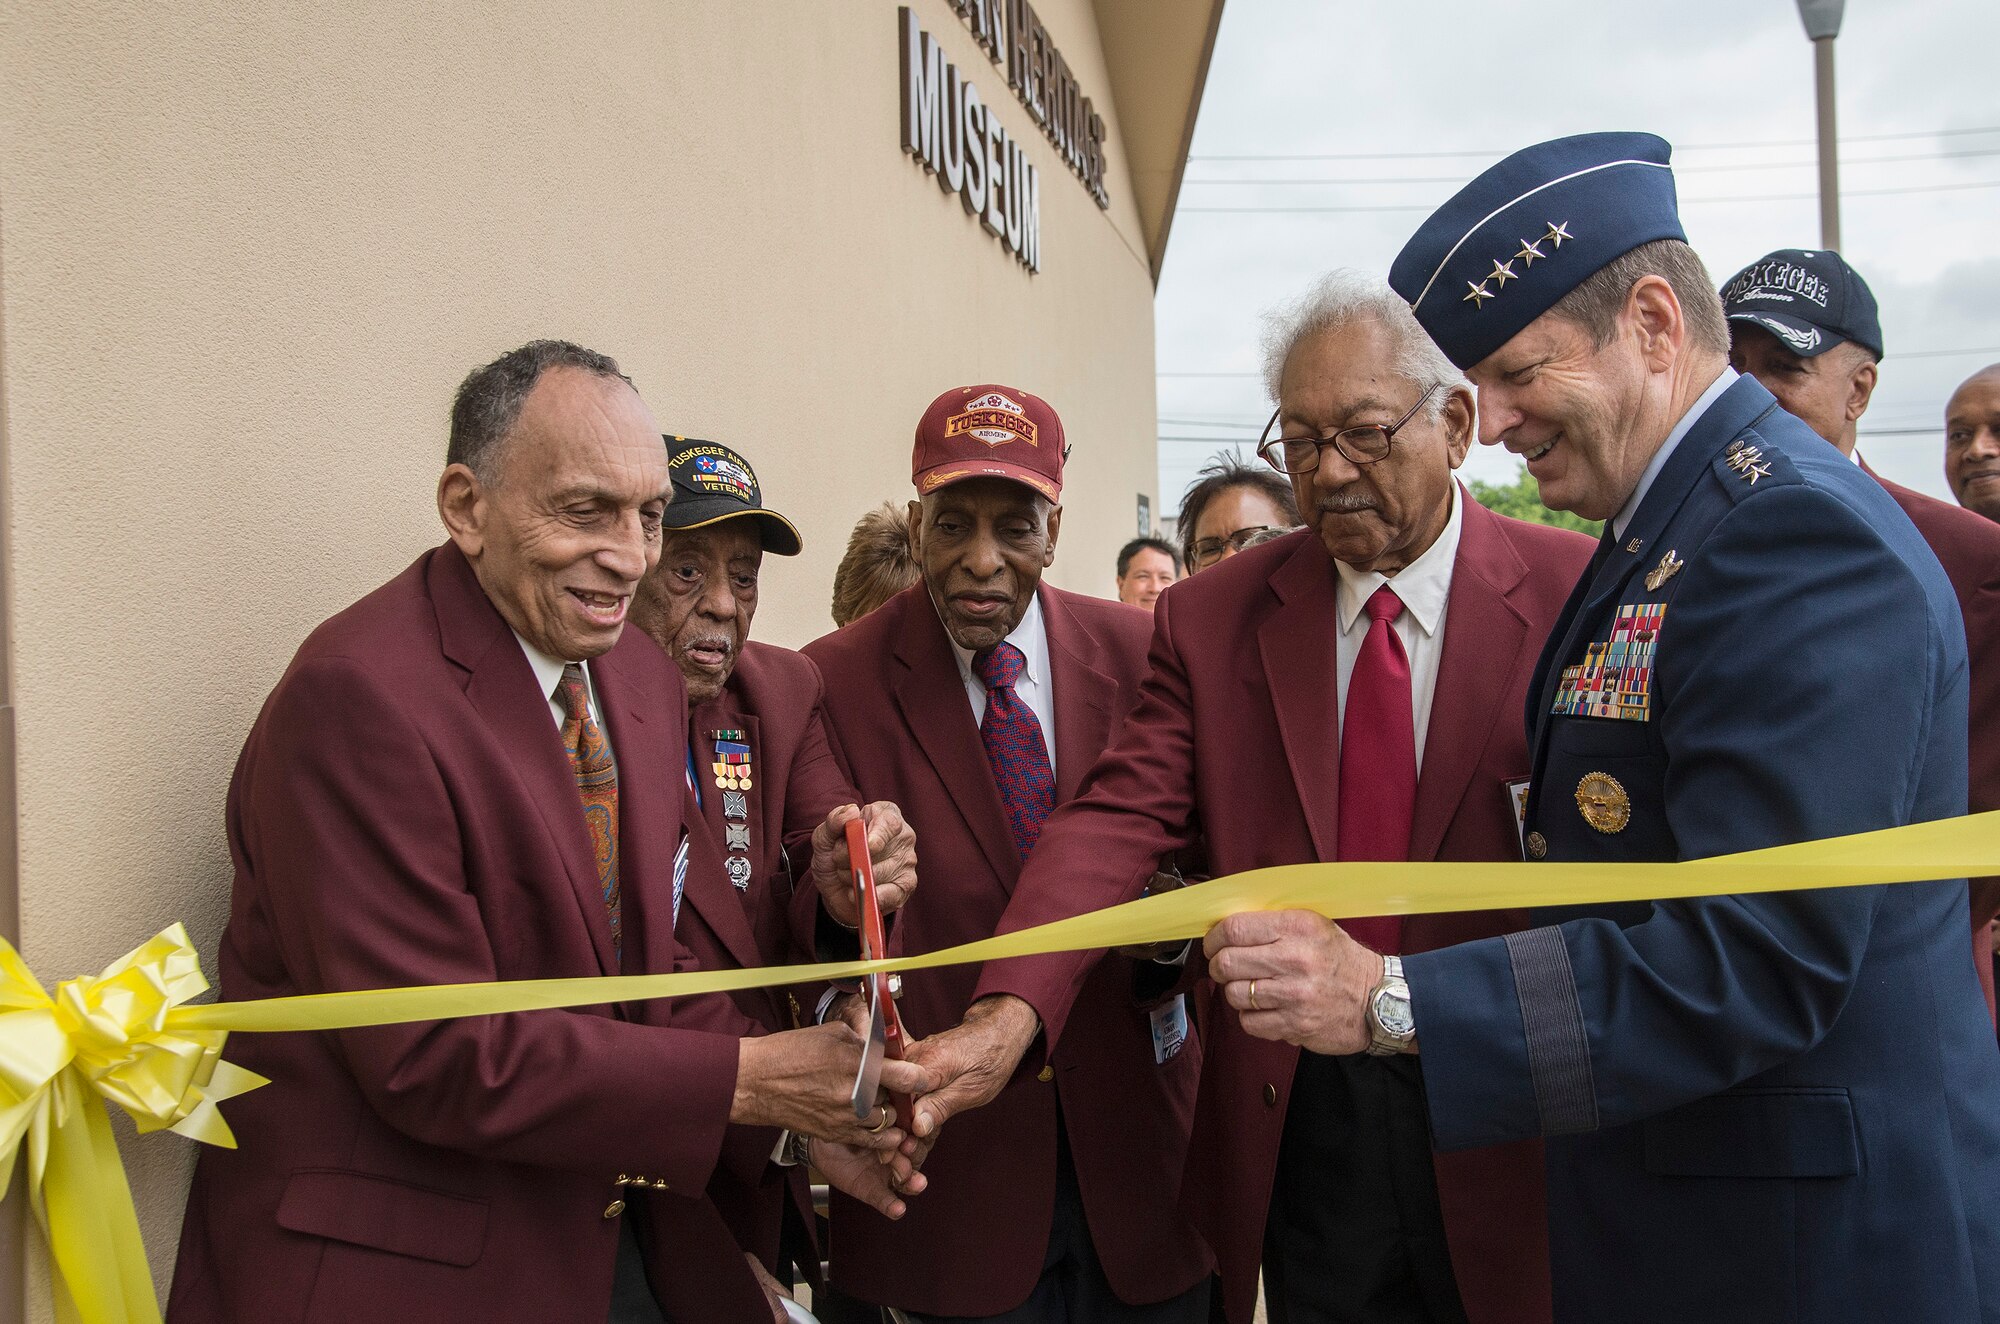 Tuskegee Airmen (from left) Eugene Derricotte, Thomas M. Ellis, Granville C. Coggs and James L. Bynum and the commander of Air Education and Training Command, Gen. Robin Rand, cut the ribbon May 4, 2015, at Joint Base San Antonio-Lackland’s Airman Heritage Museum. The unveiling ceremony honors the enlisted Tuskegee Airmen, a group of African-American military ground support Airmen who were part of the 332nd Fighter Group and the 477th Bombardment Group during World War II. (U.S. Air Force photo/Johnny Saldivar)